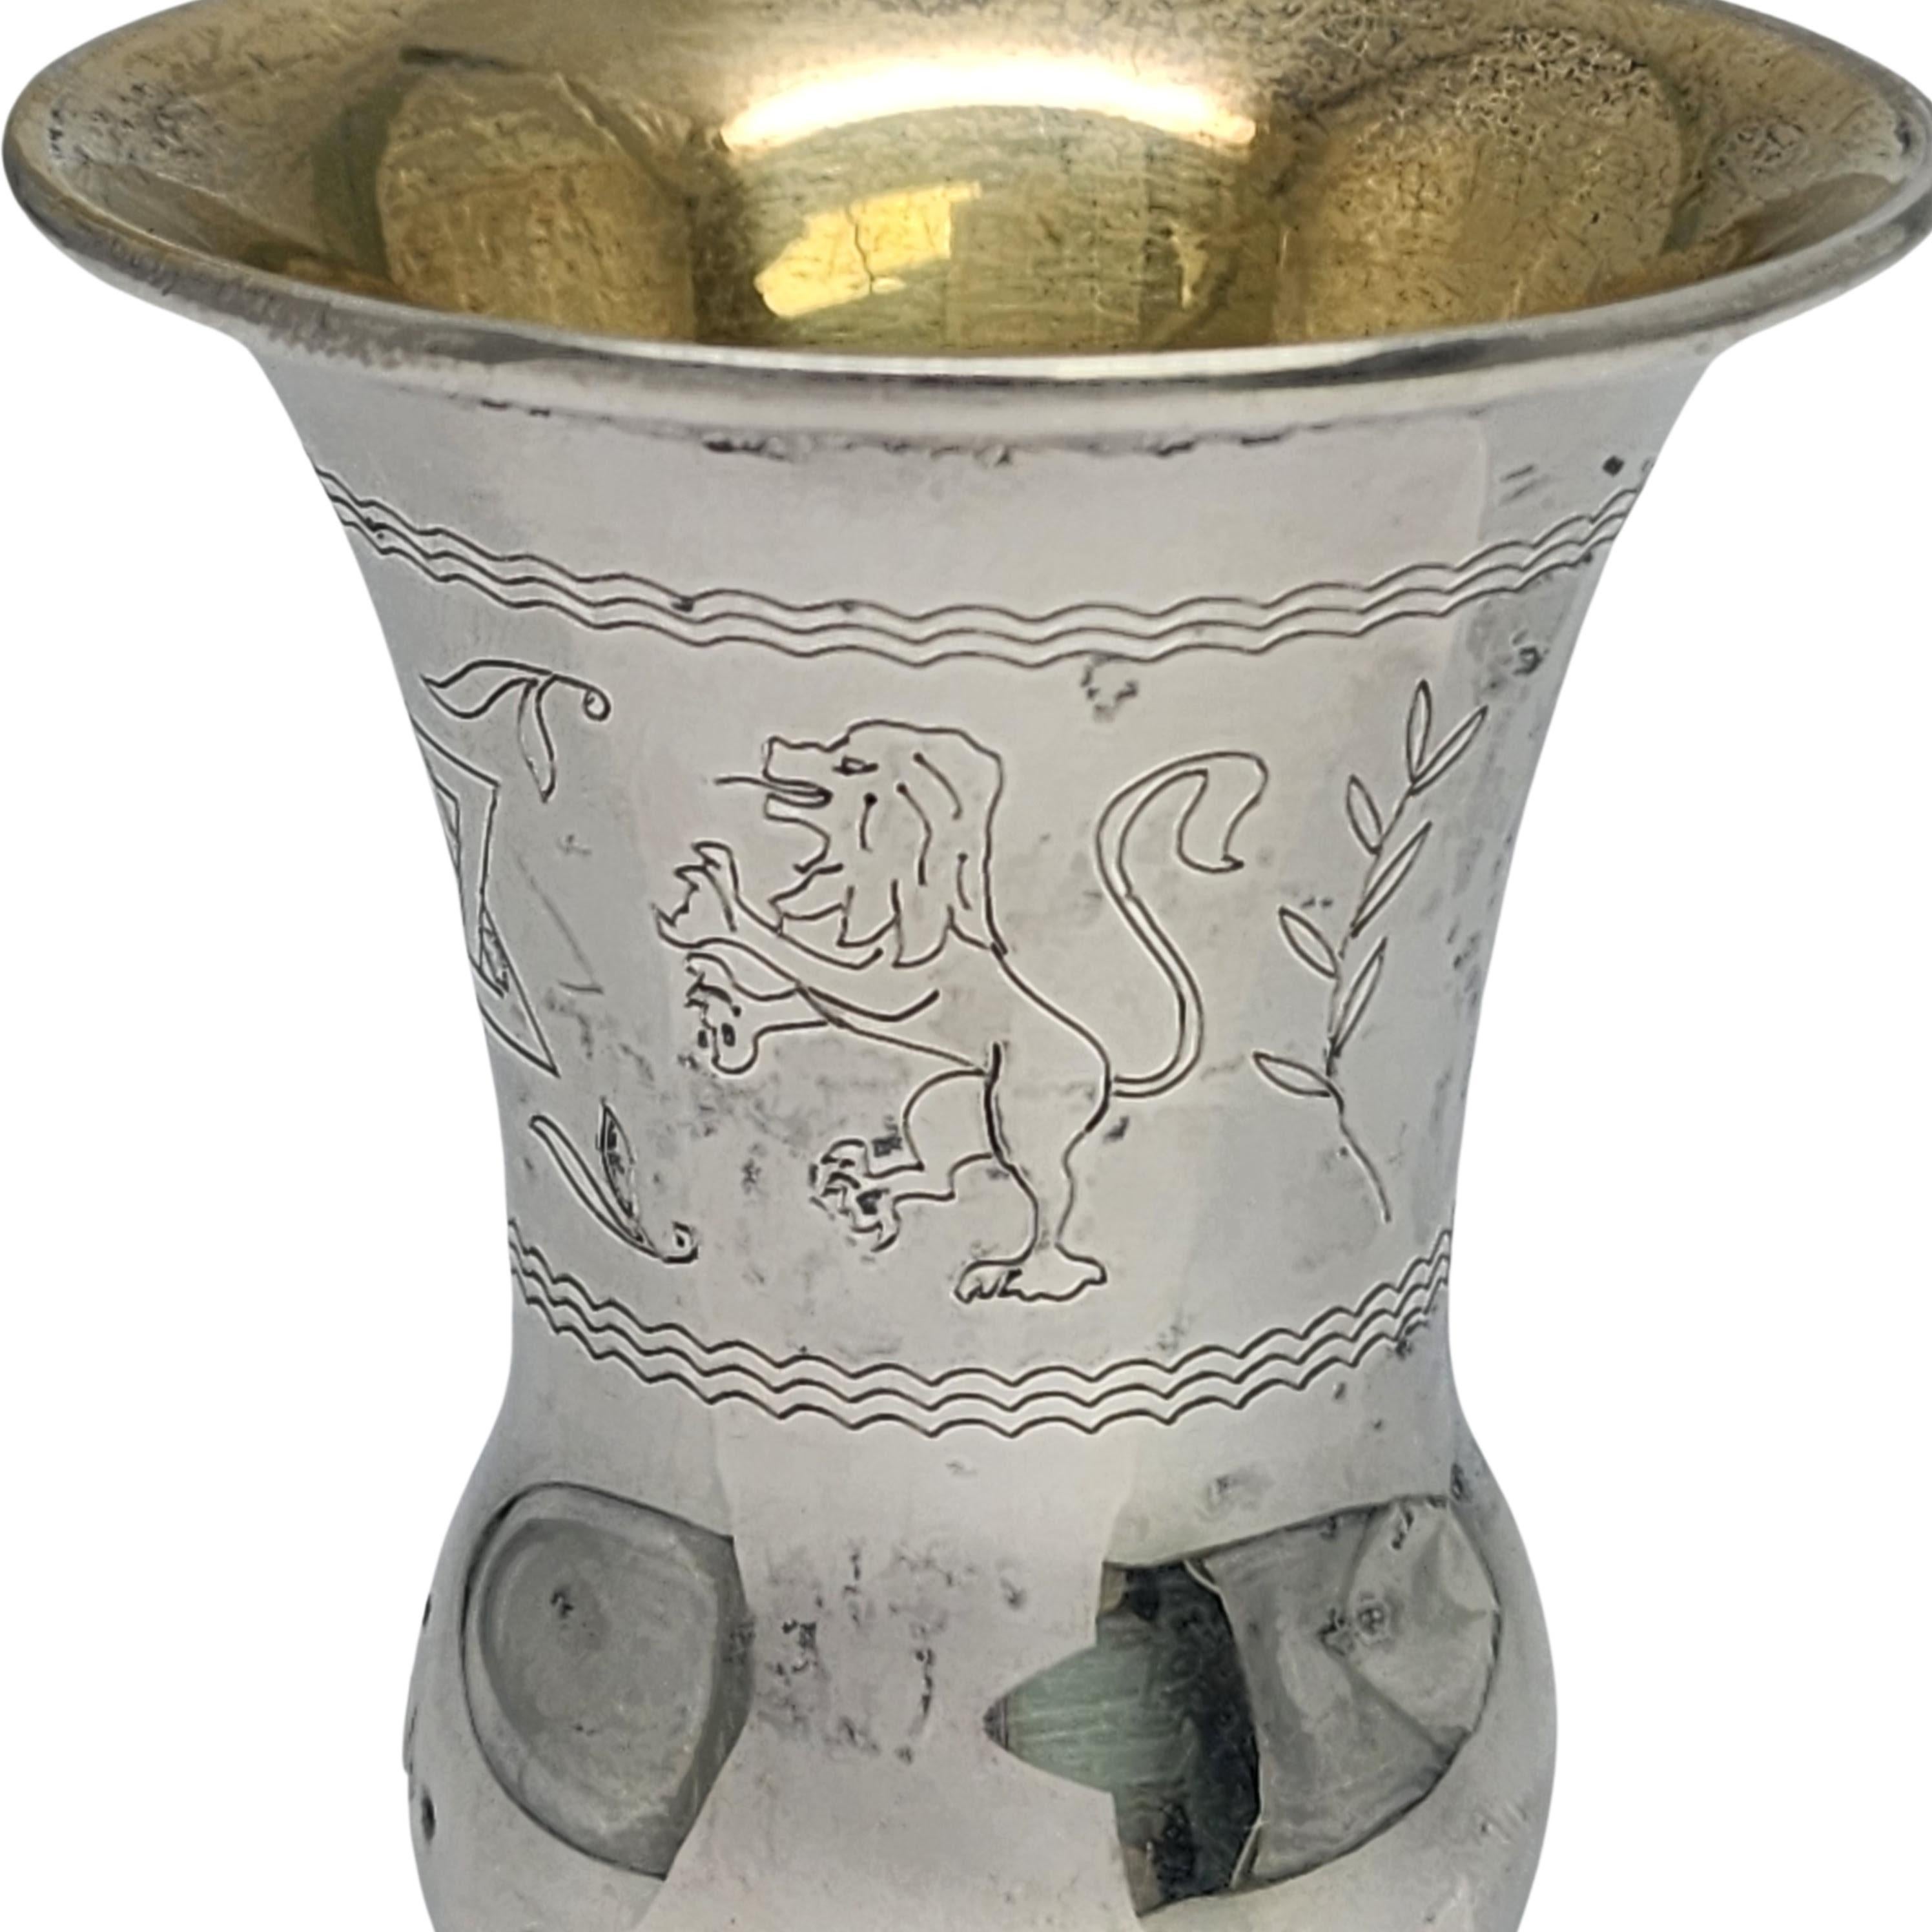 Web Sterling Silver Gold Wash Interior Kiddush Cup with Monogram #16813 For Sale 4